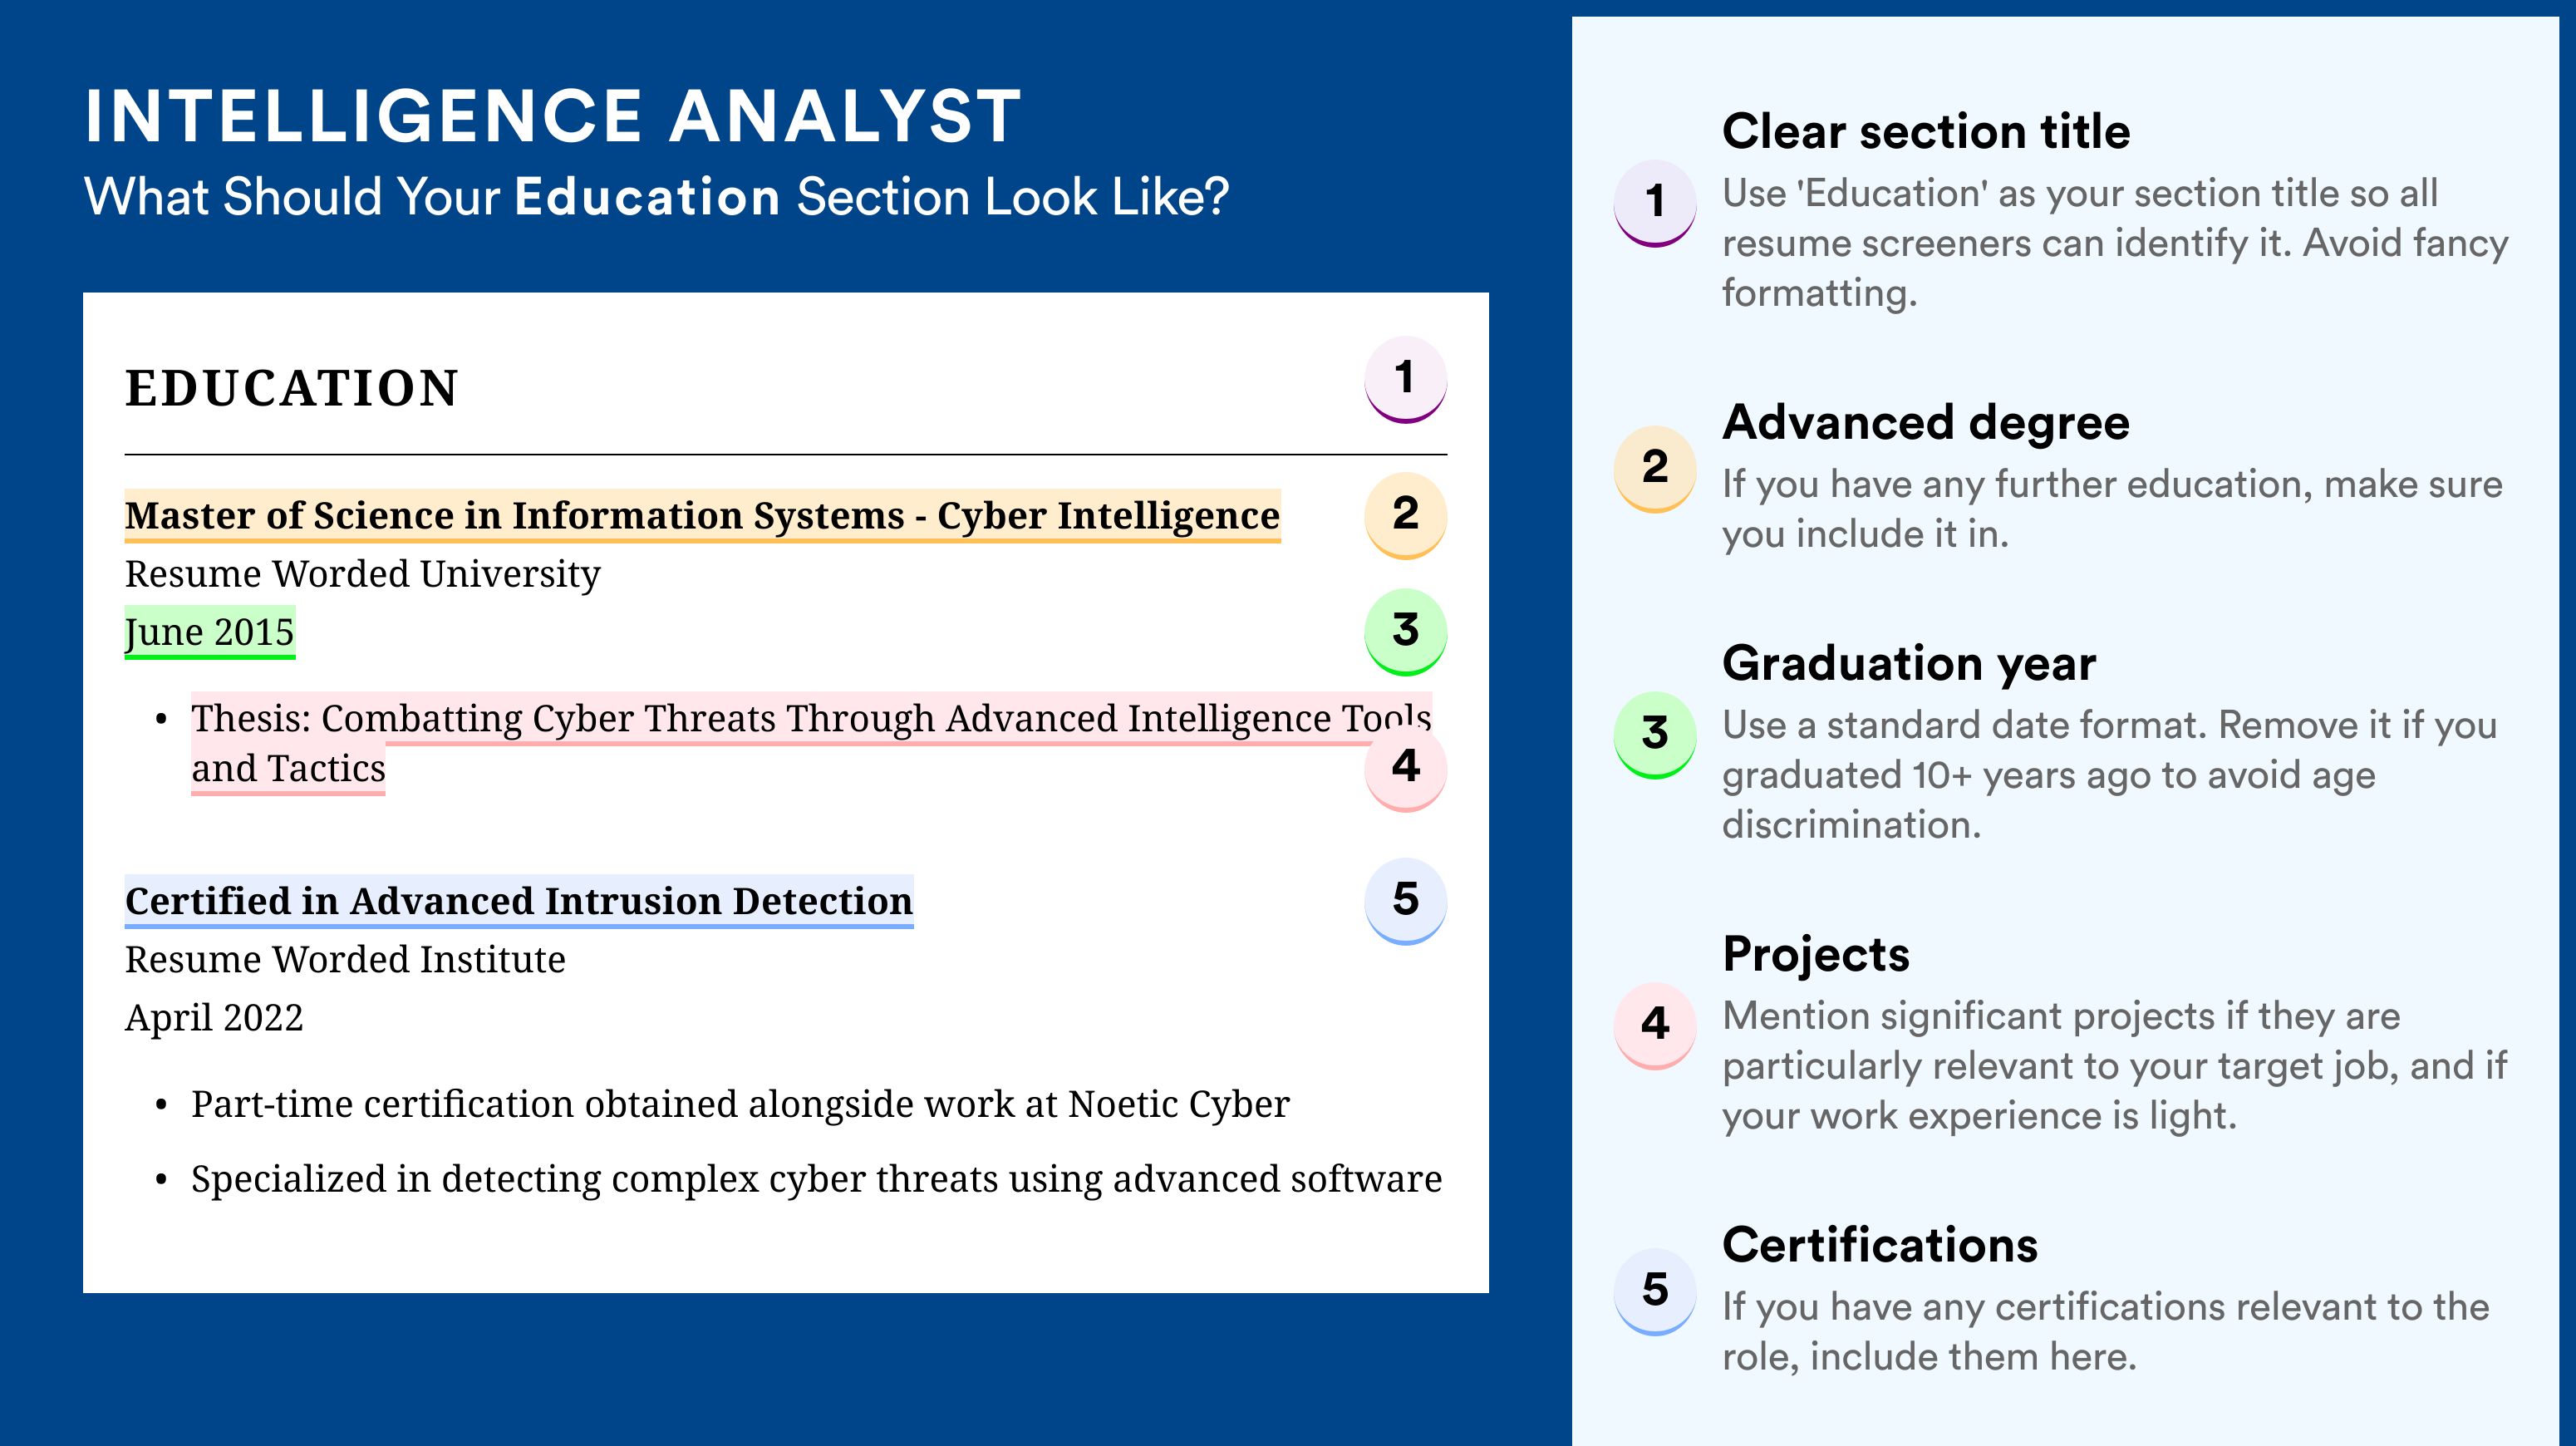 How To Write An Education Section - Intelligence Analyst Roles